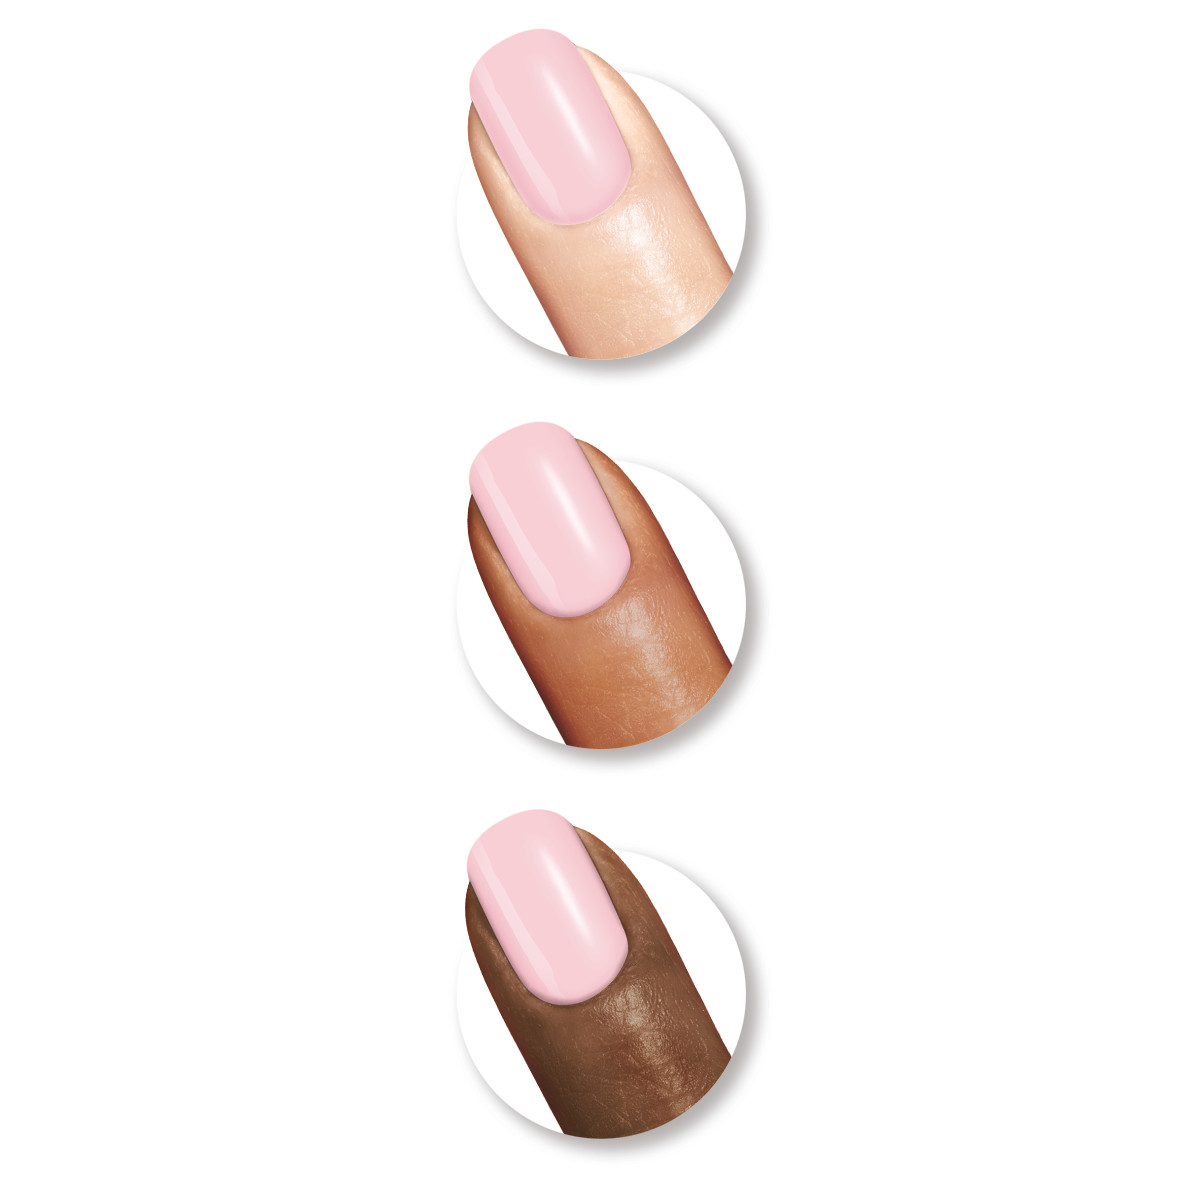 Sally Hansen Complete Salon Manicure Nail Color, Blush Against the World - image 2 of 2